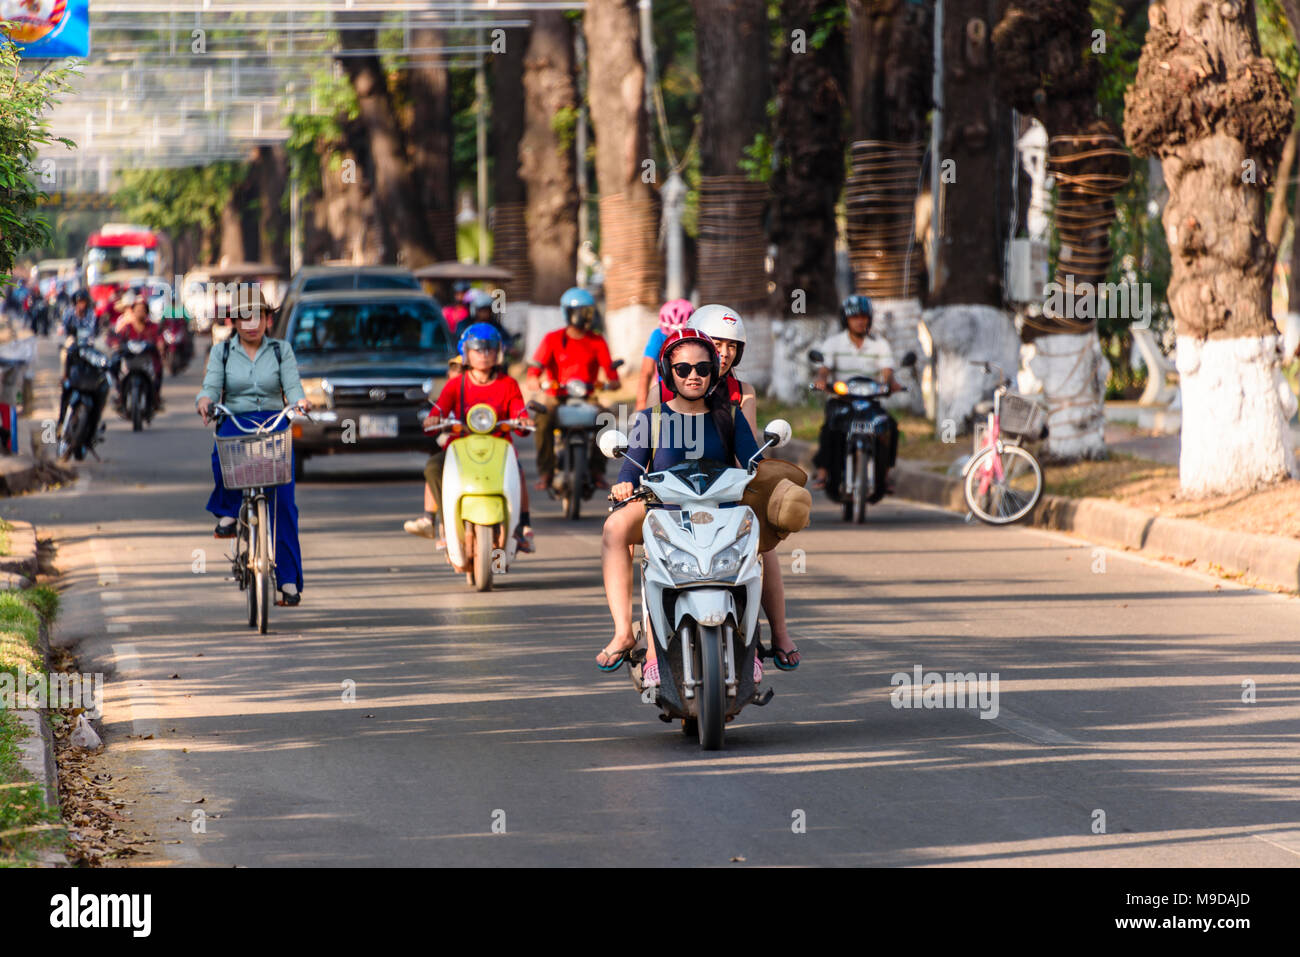 People riding scooters, bicycles and driving cars along a road in Siem Reap, Cambodia. Stock Photo